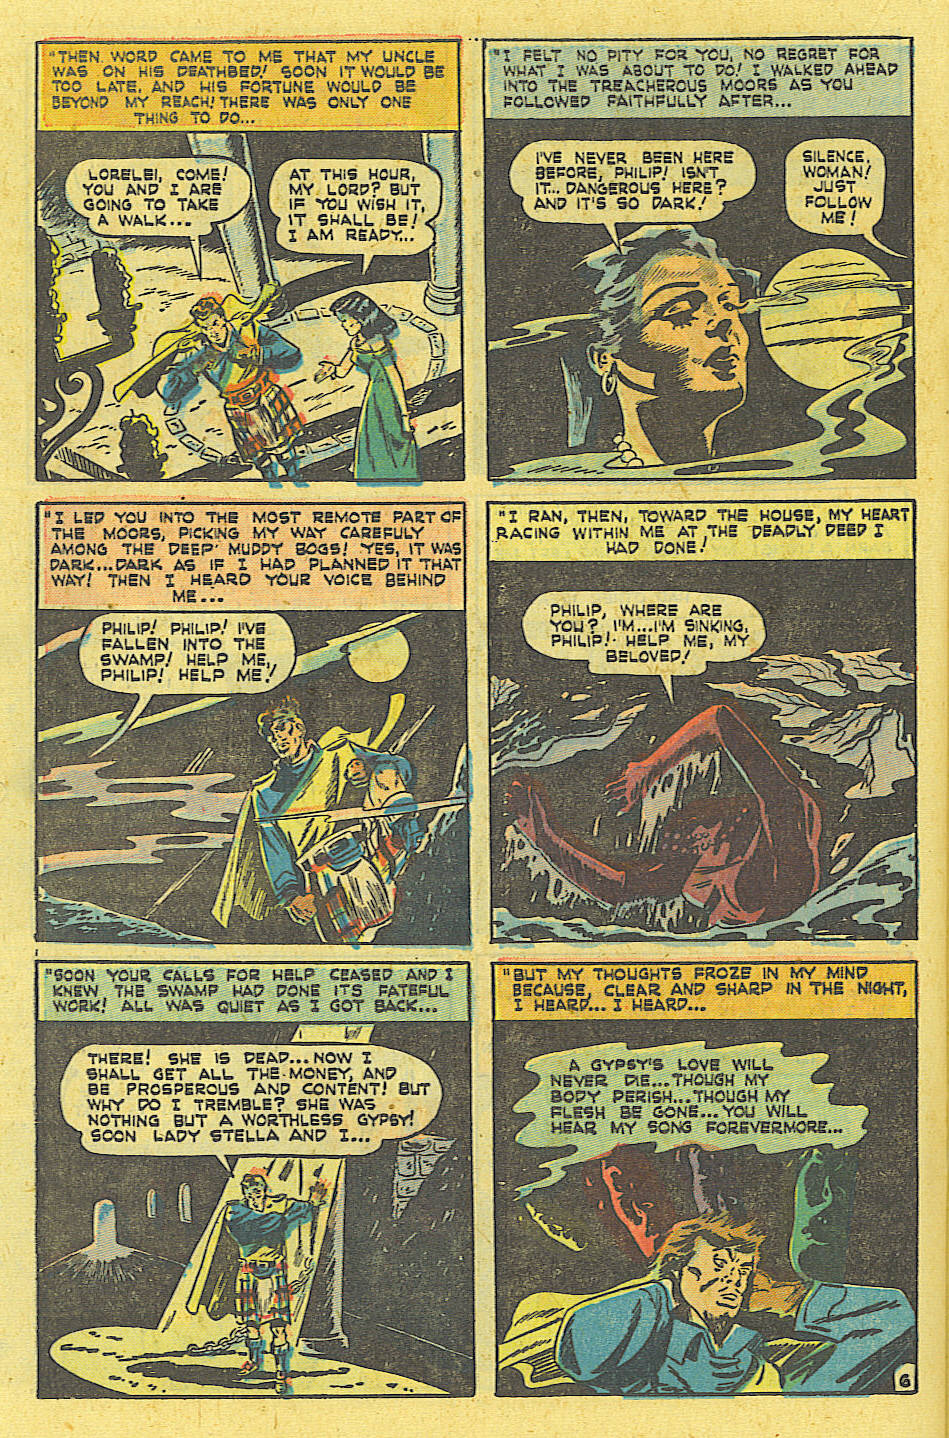 Marvel Tales (1949) 95 Page 15